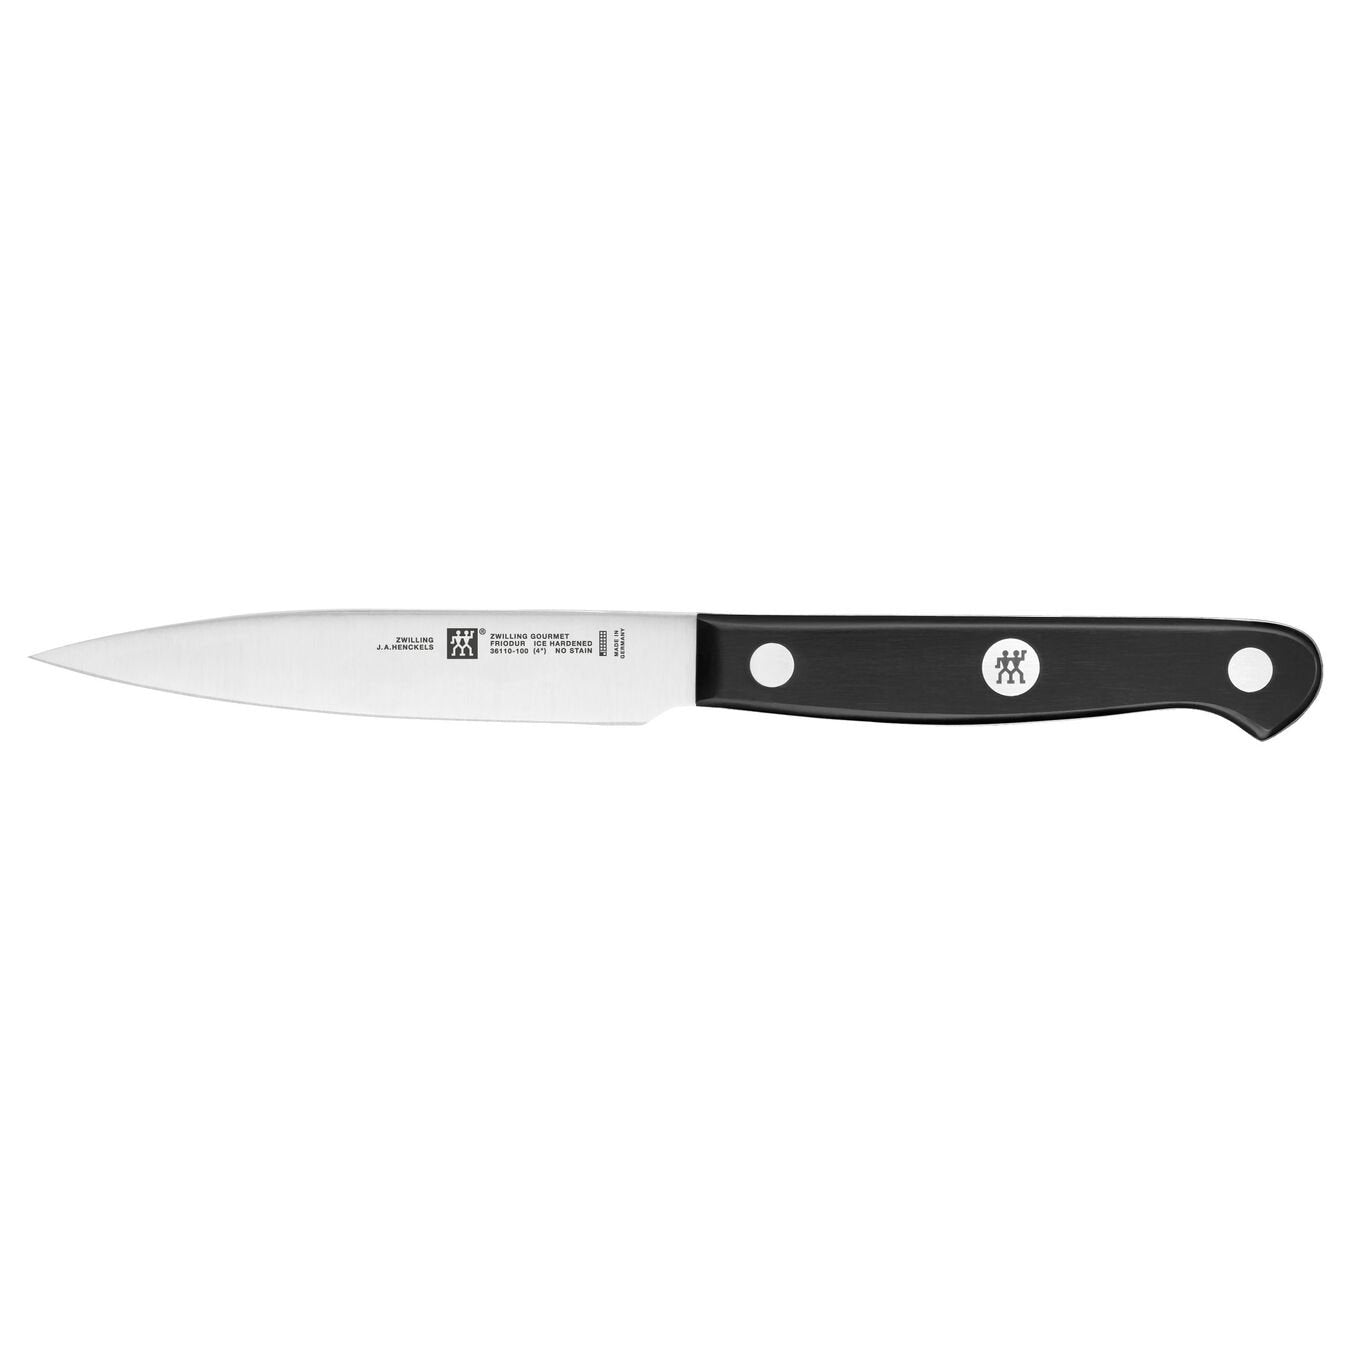 View Zwilling J. A. Henckels - Gourmet 4 Inch Paring Knife